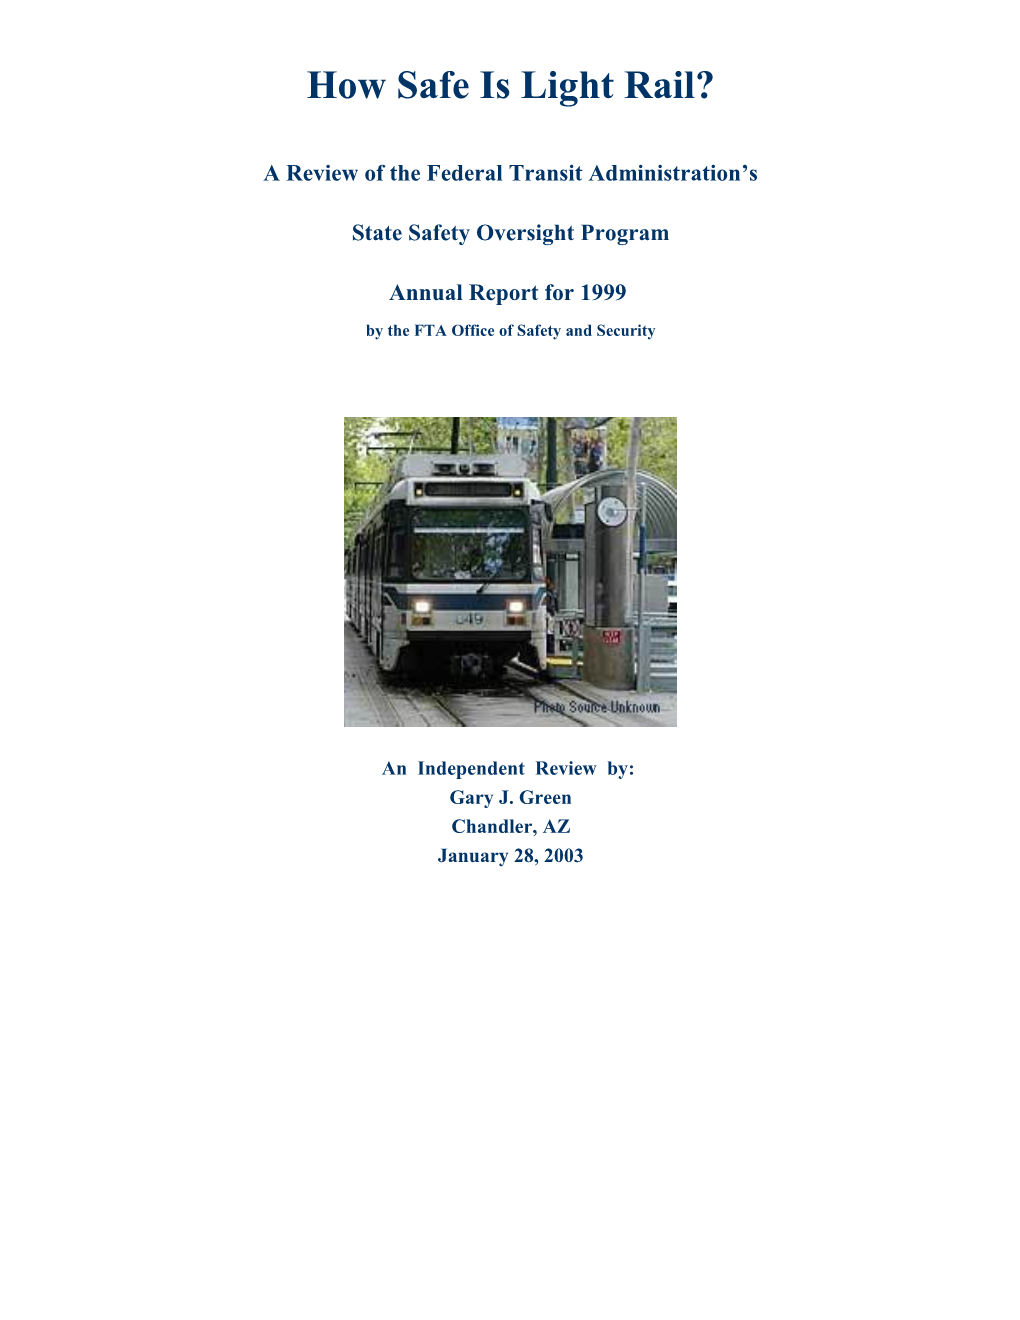 State Safety Oversight Annual Report